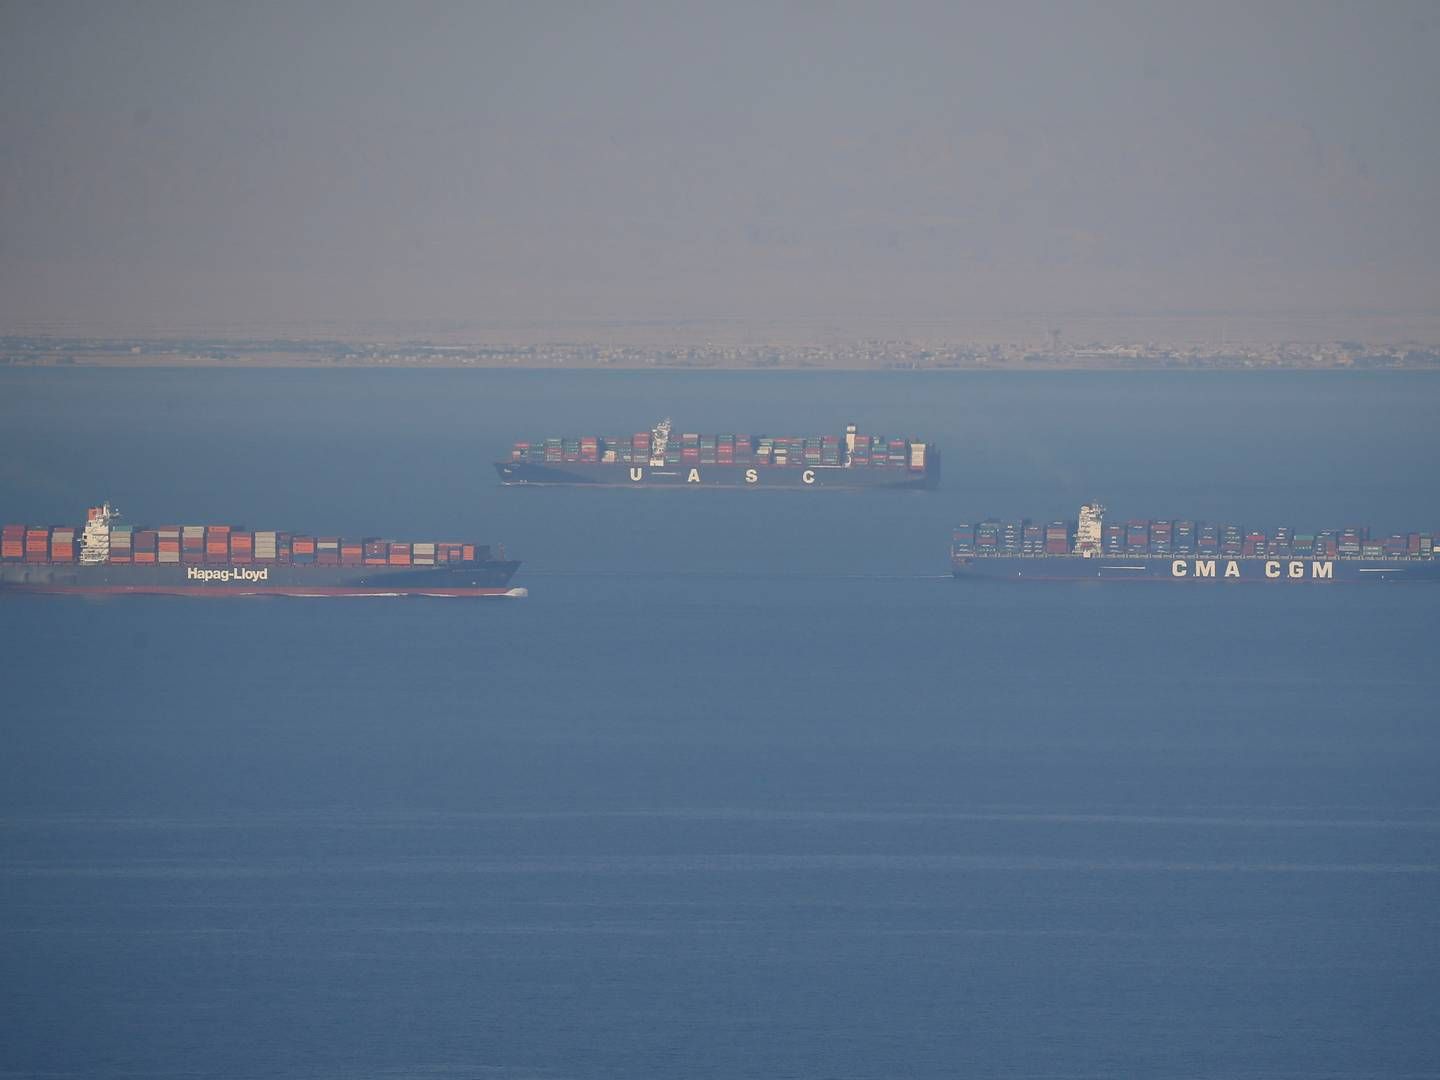 Container ship on its way through the Gulf of Suez. | Photo: Amr Abdallah Dalsh/Reuters/Ritzau Scanpix